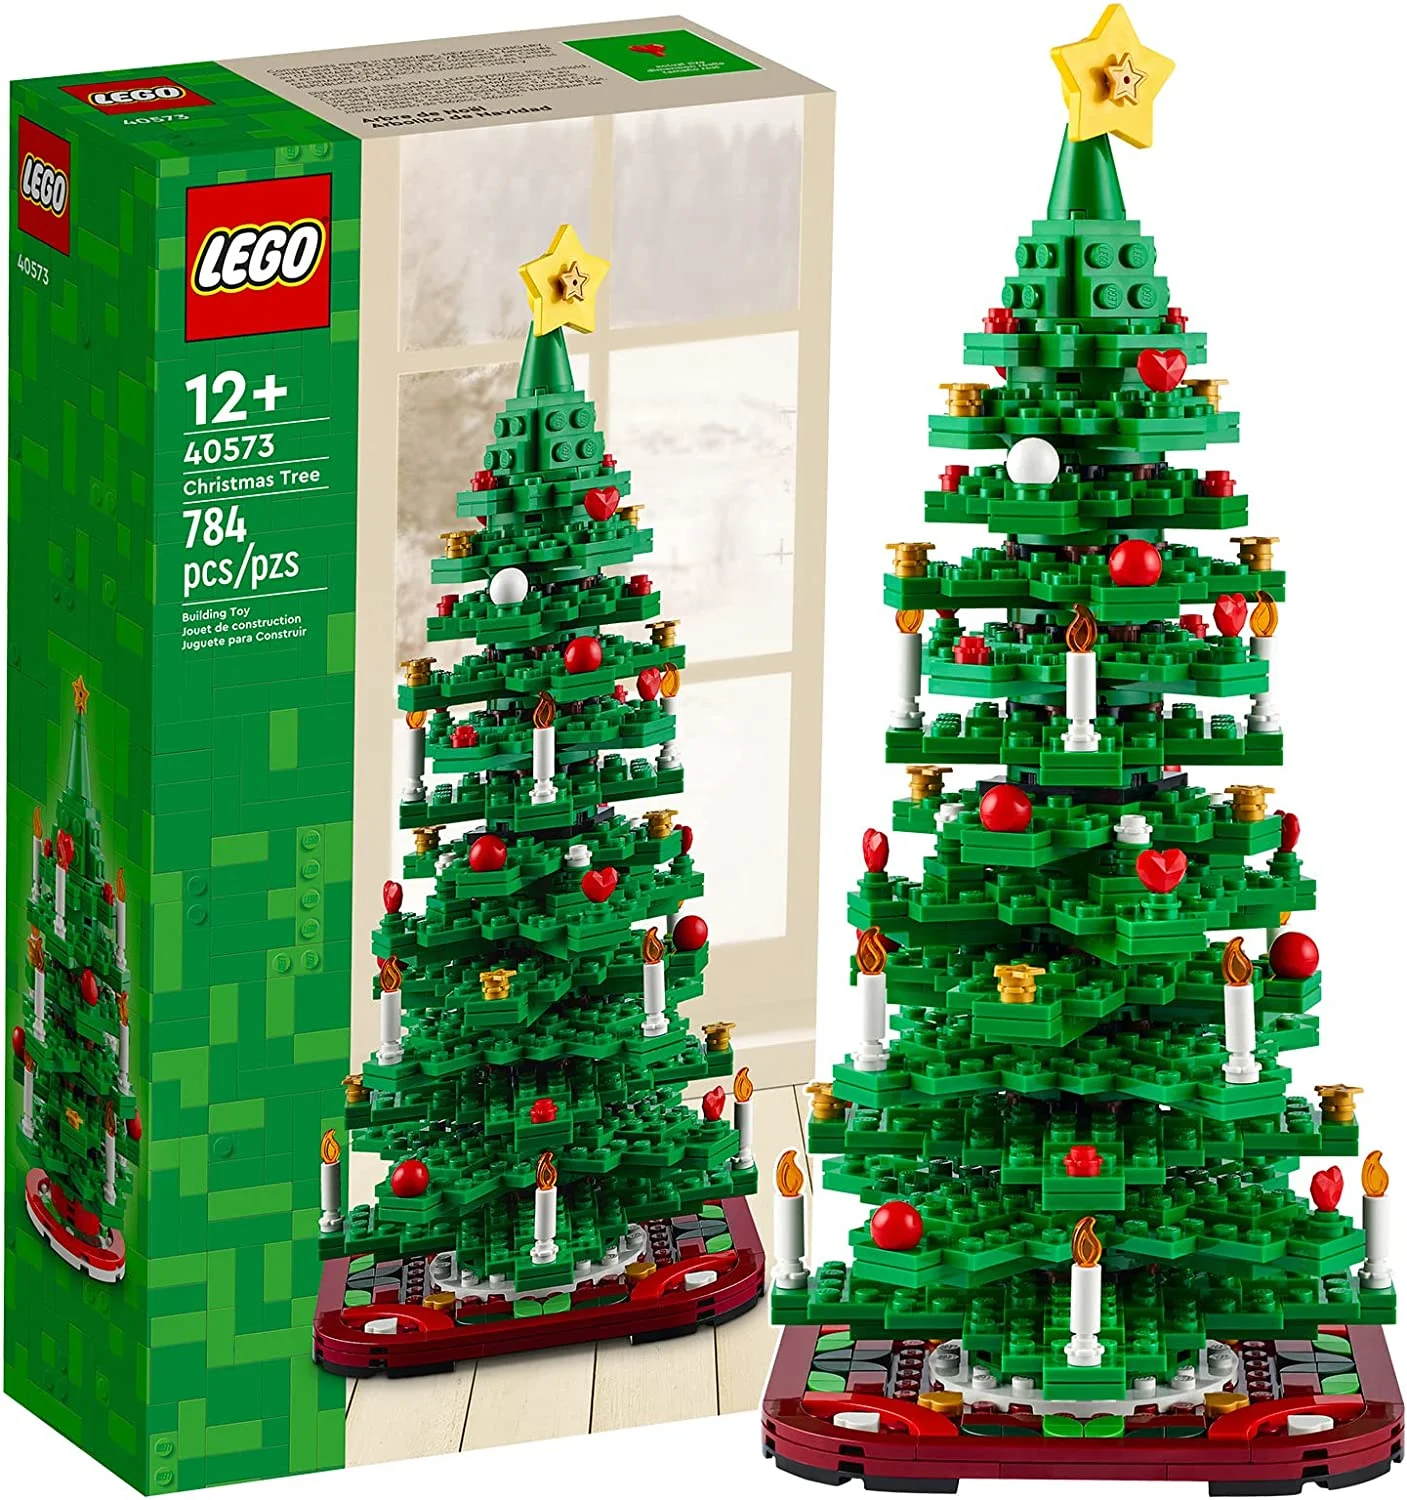 Lego Has A New Christmas Tree Set That Will Be A Cute Addition To Your Holiday Decor